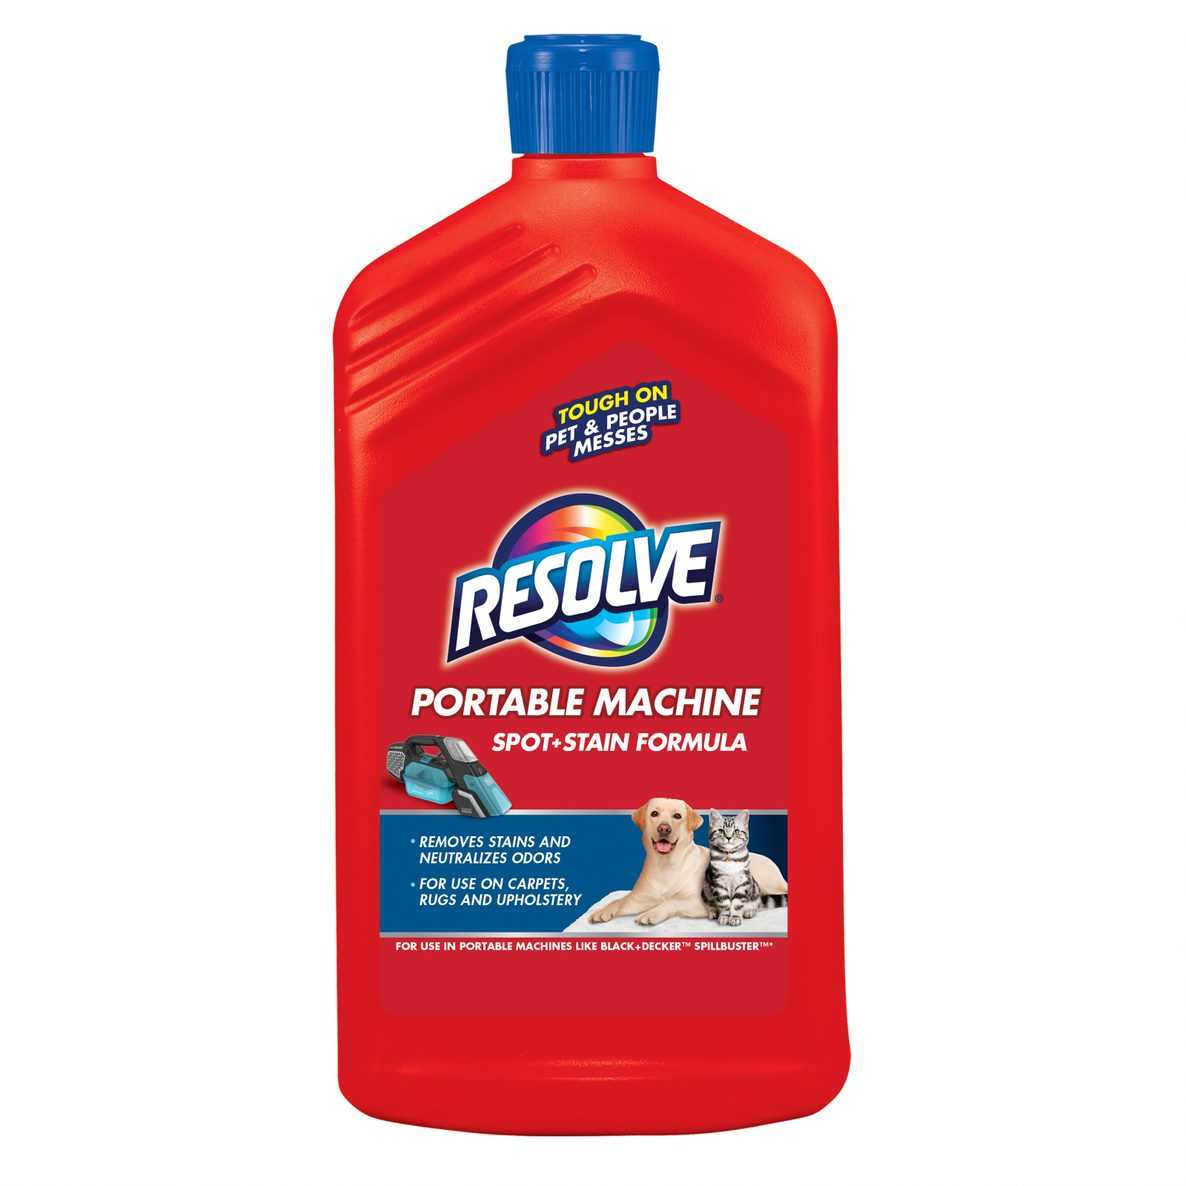 Resolve Spot Stain Remover Multi-Fabric Upholstery Cleaner Spray (22 fl oz)  X2